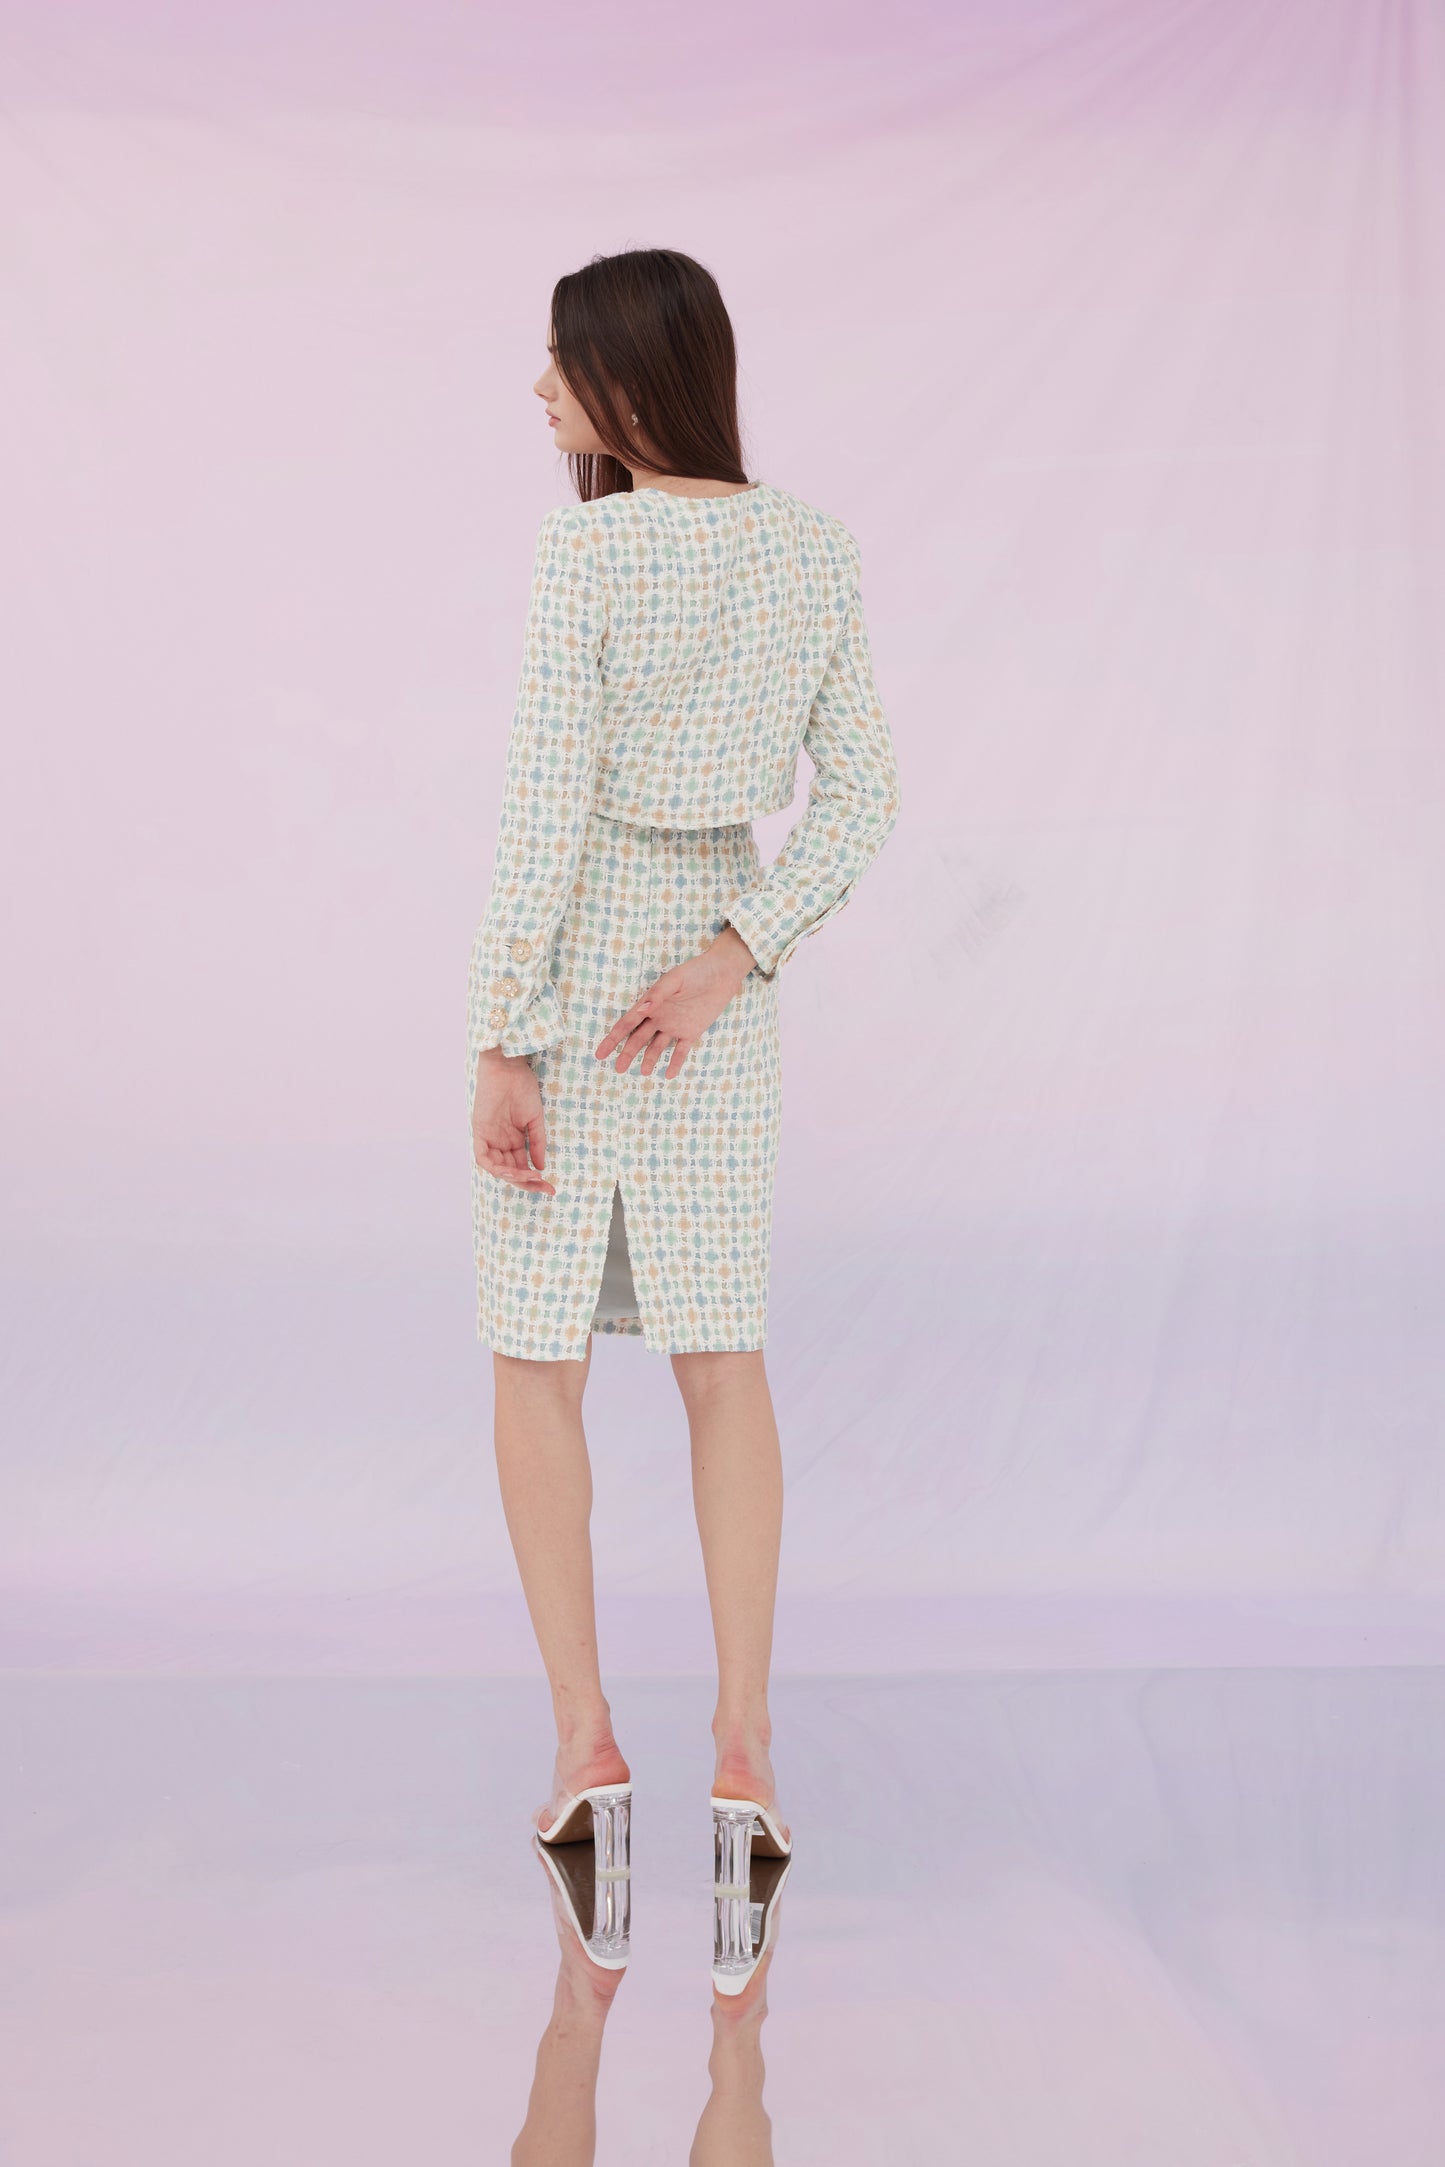 Glynice Blue Green Checkers Tweed Jacket and Skirt